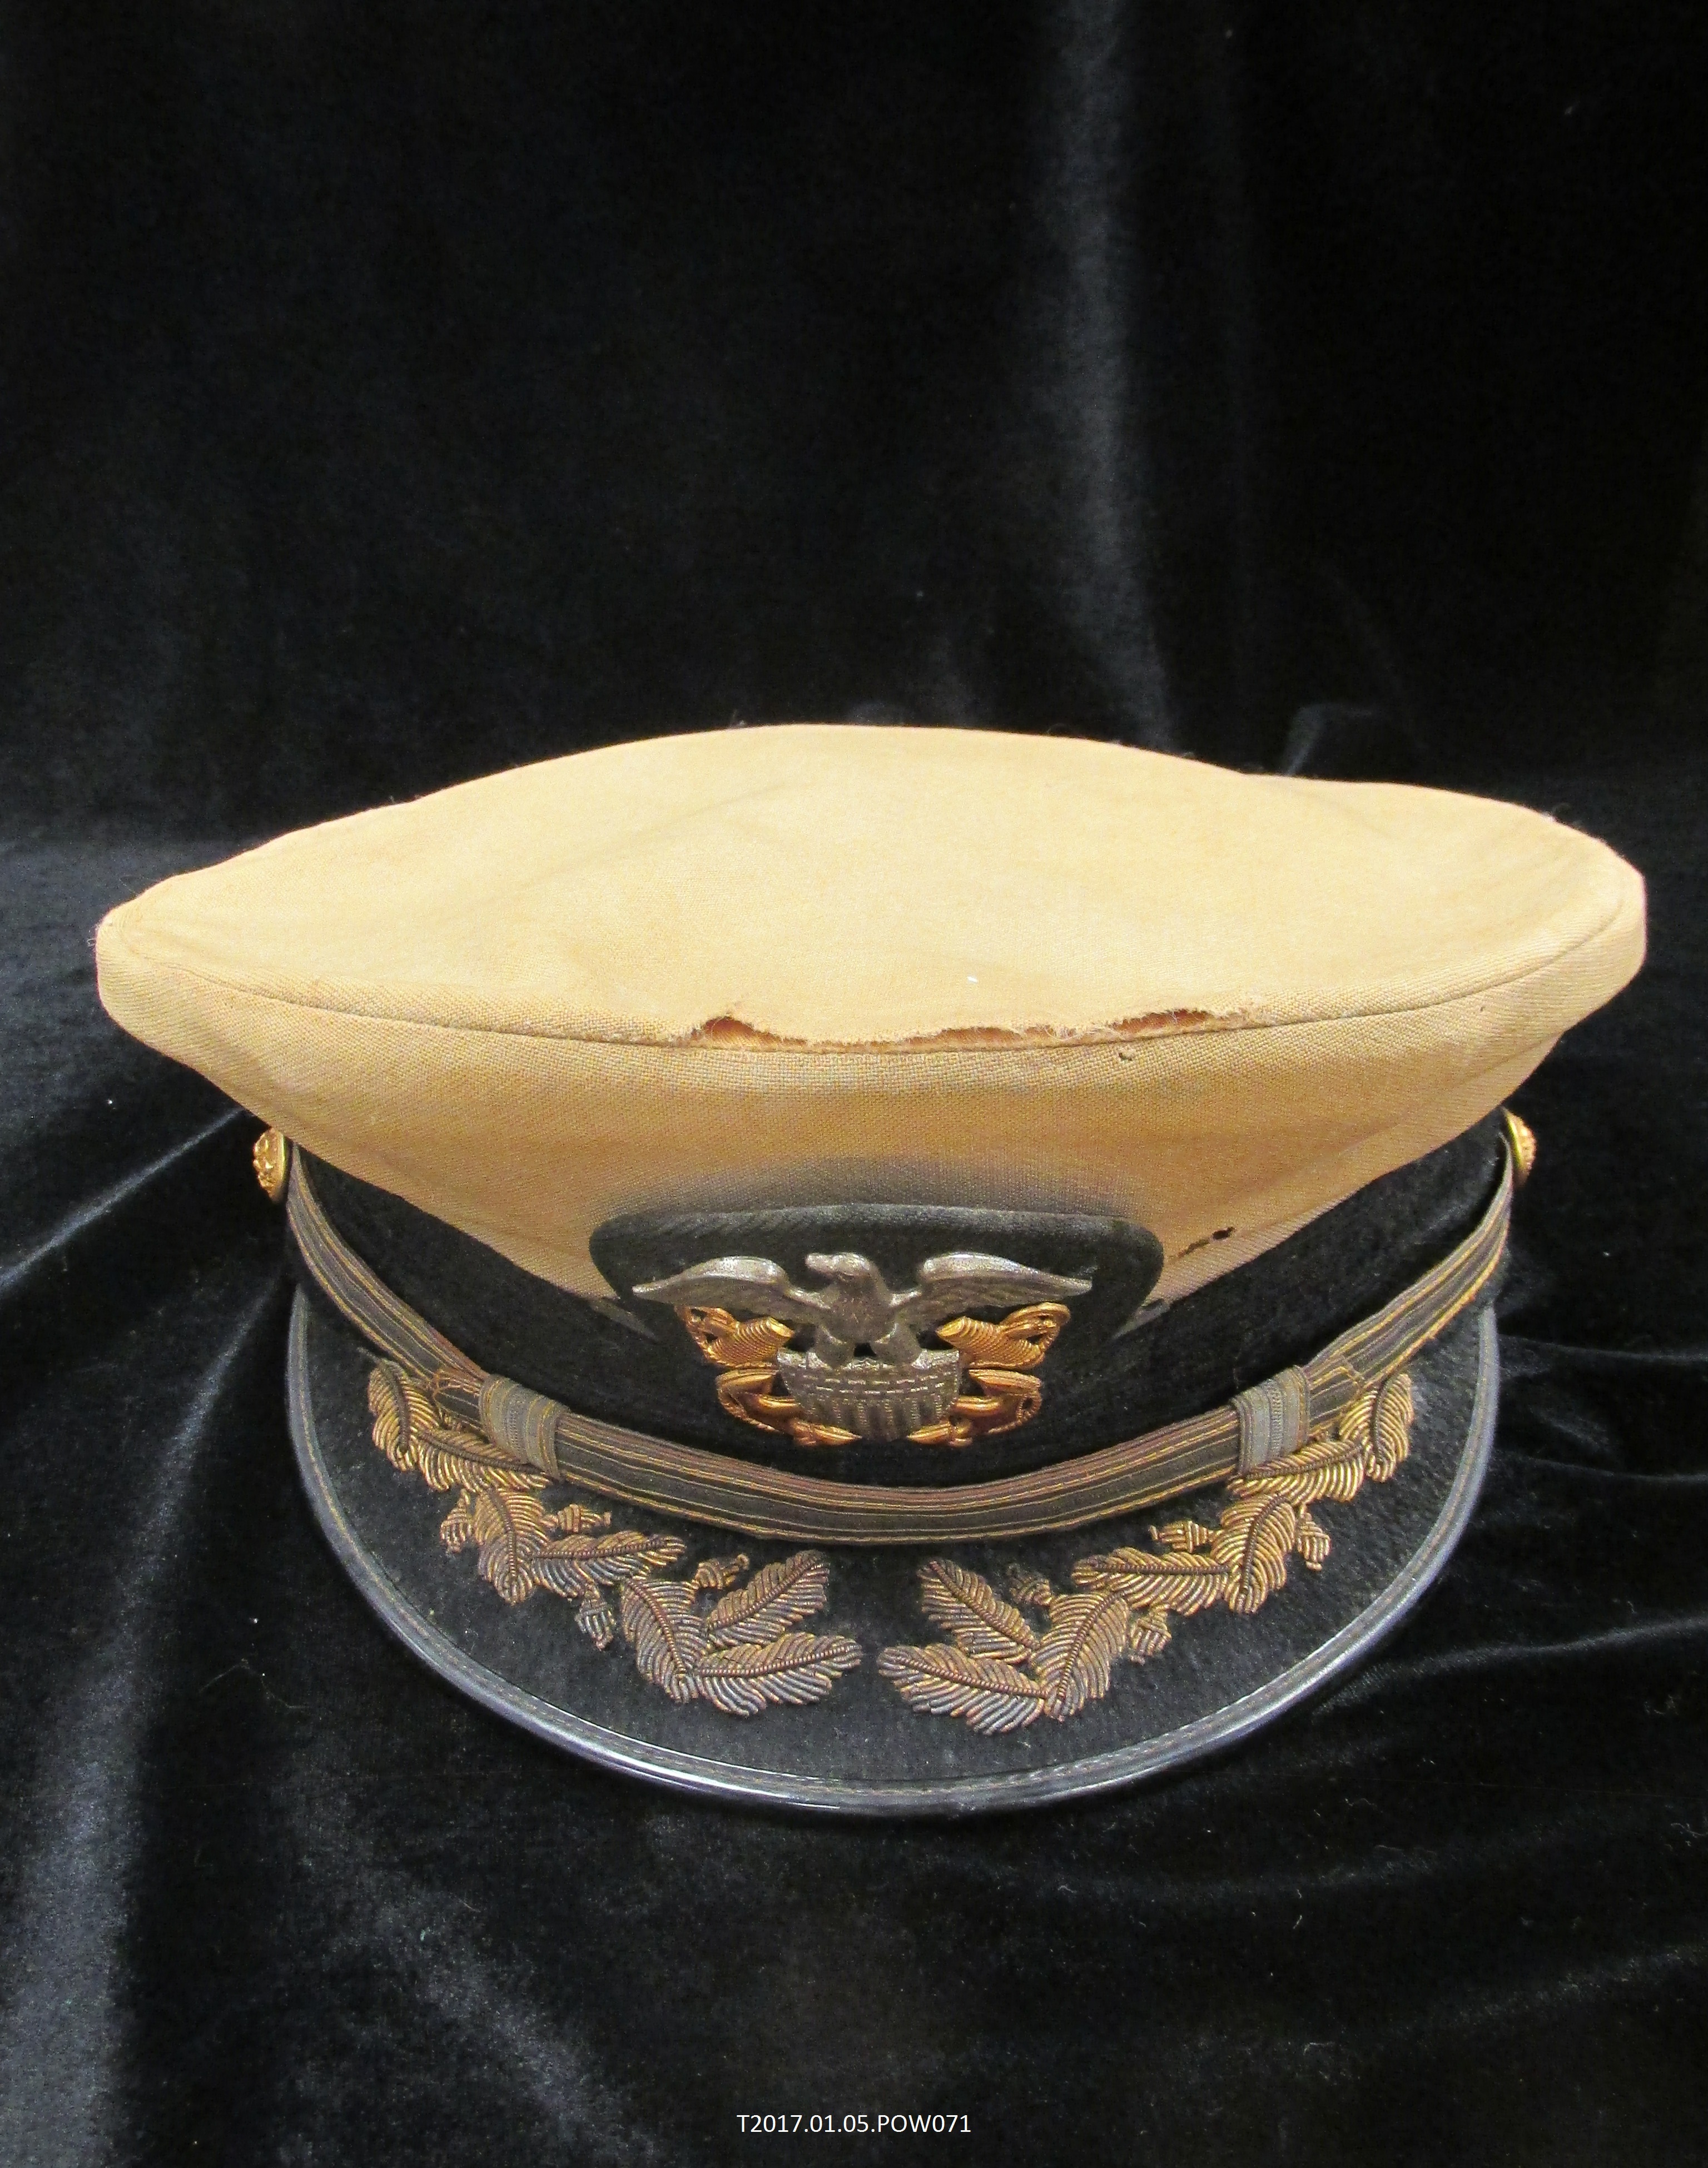 Naval commander’s cap belonging to Naval intelligence officer Cdr. Robert S. Boroughs. Photo courtesy of Lynn Amwake.